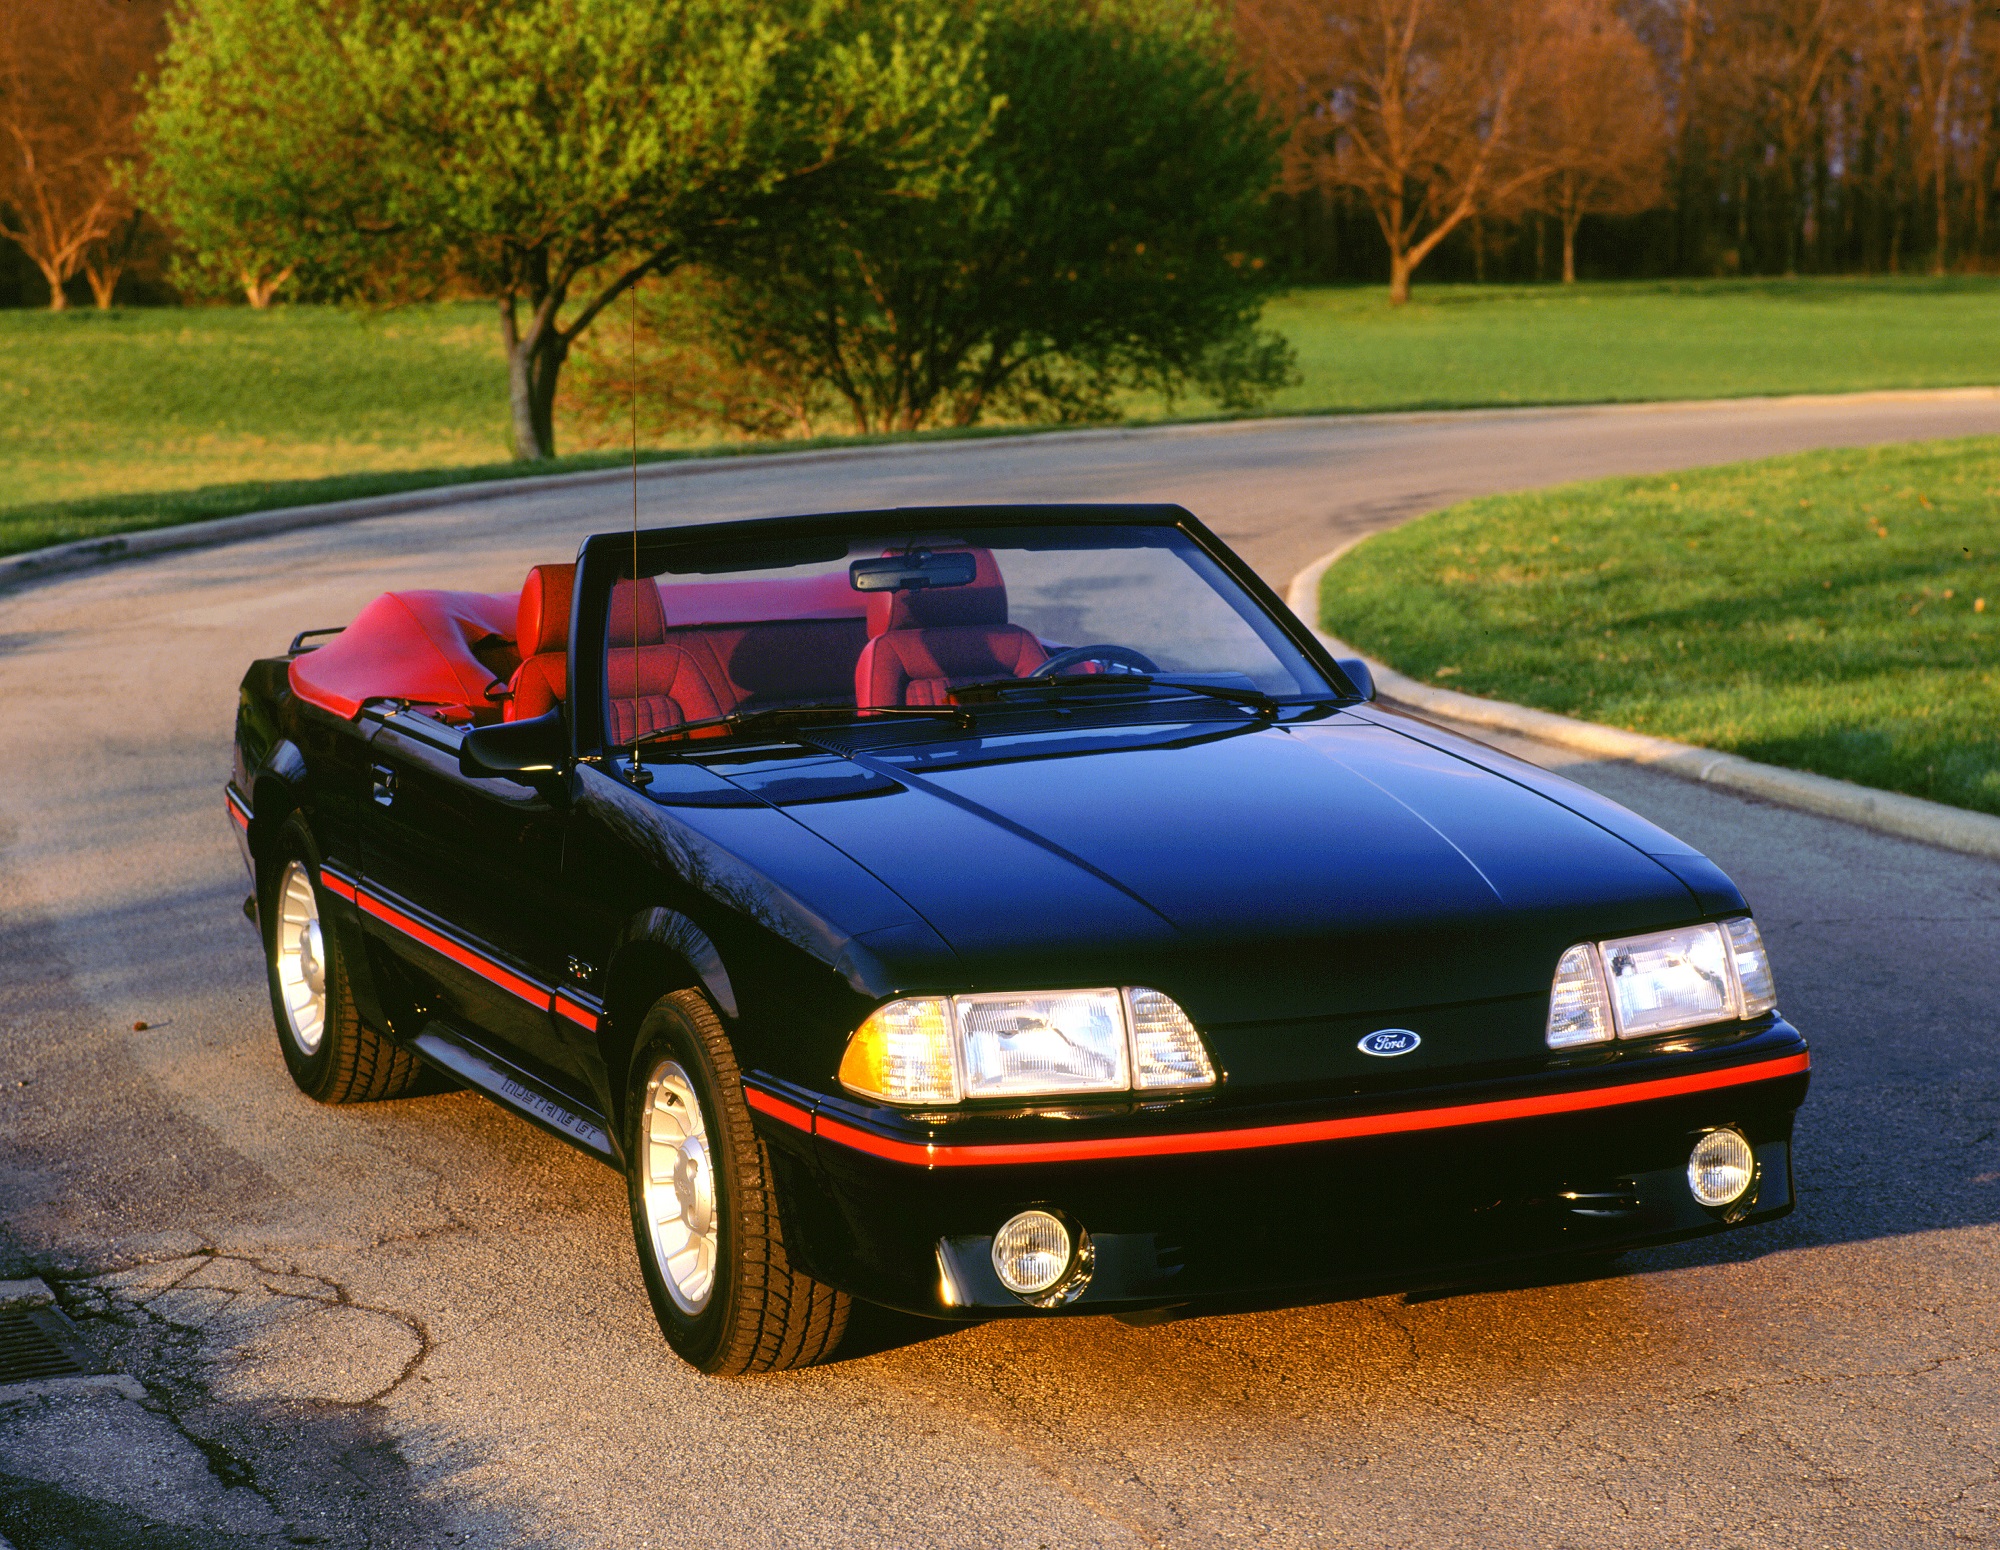 The Mustang Fox Body like this convertible is the third generation of the pony car.